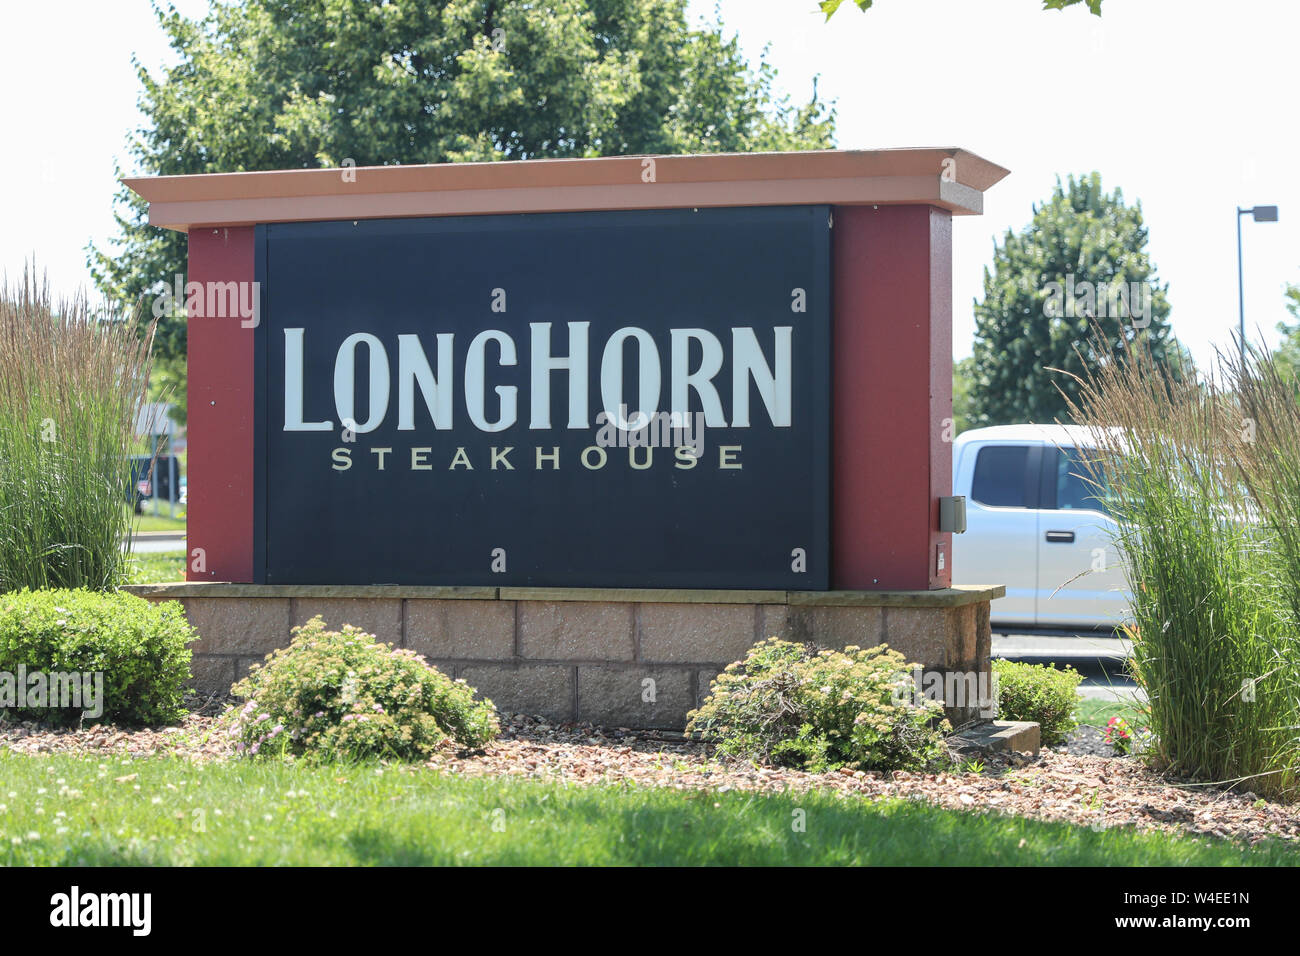 Princeton New Jersey - June 23, 2019: LongHorn Steakhouse casual dining restaurant. LongHorn Steakhouse is owned and operated by Darden Restaurants I Stock Photo